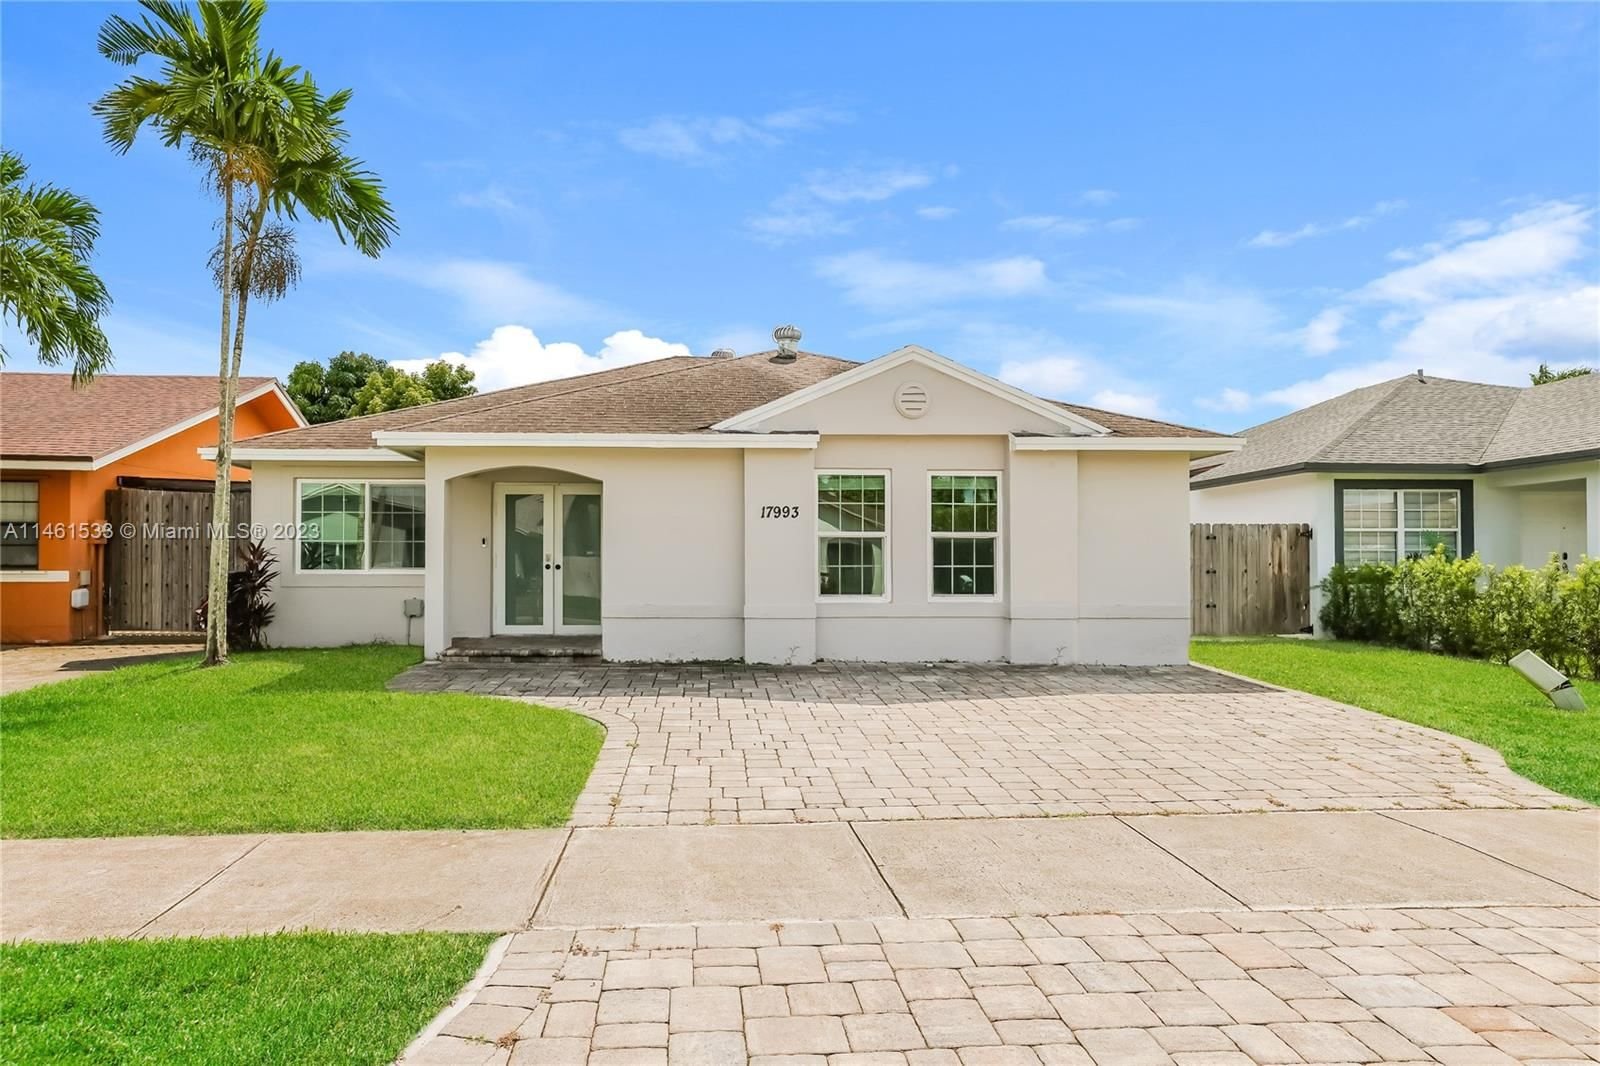 Real estate property located at 17993 135th Ave, Miami-Dade County, FOREST VIEW SUB, Miami, FL